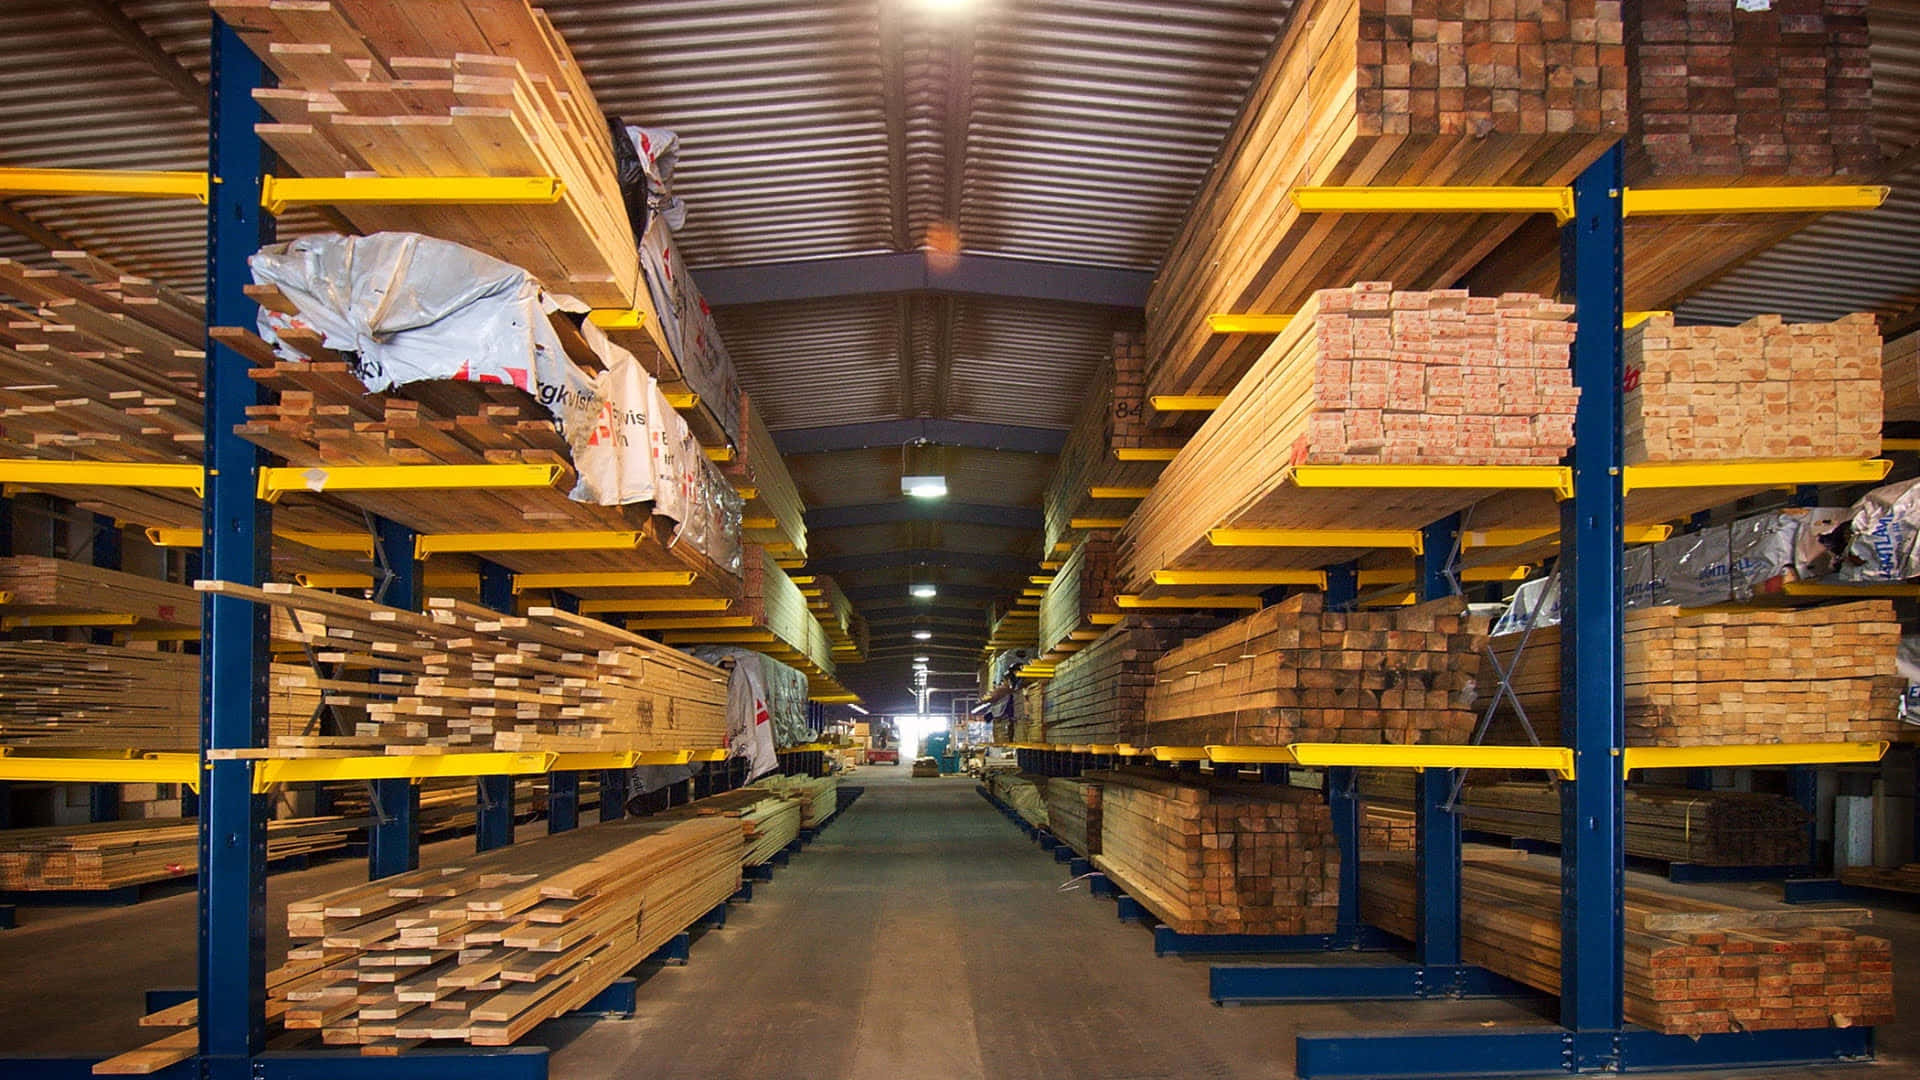 A Warehouse With Many Wooden Boards